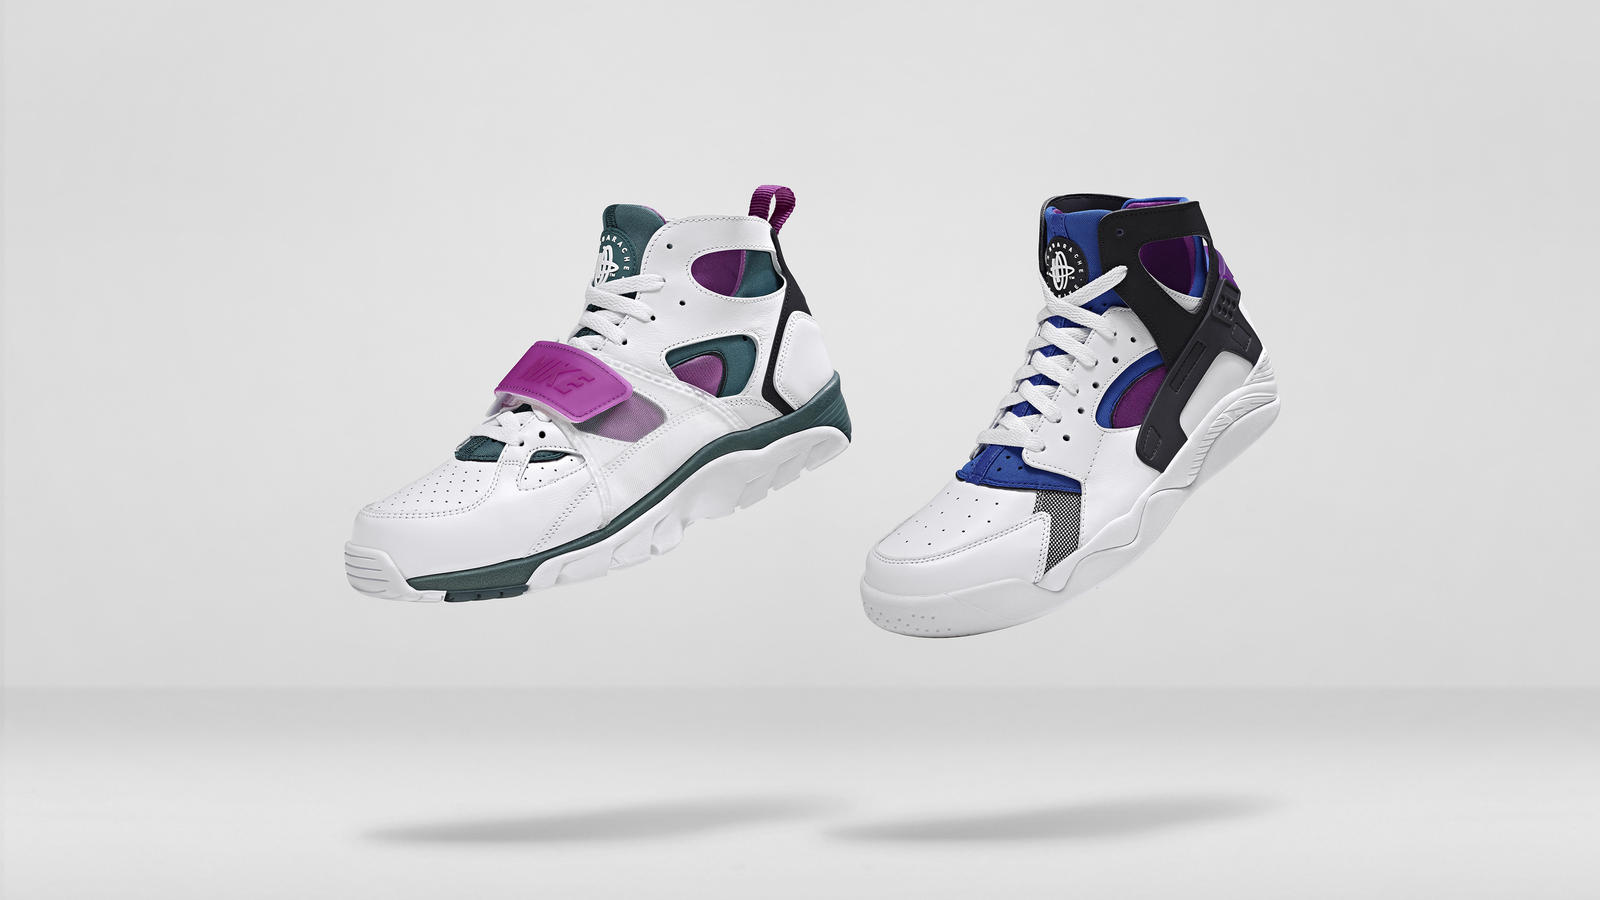 Sandal Sneakers The Air Flight Huarache And Trainer